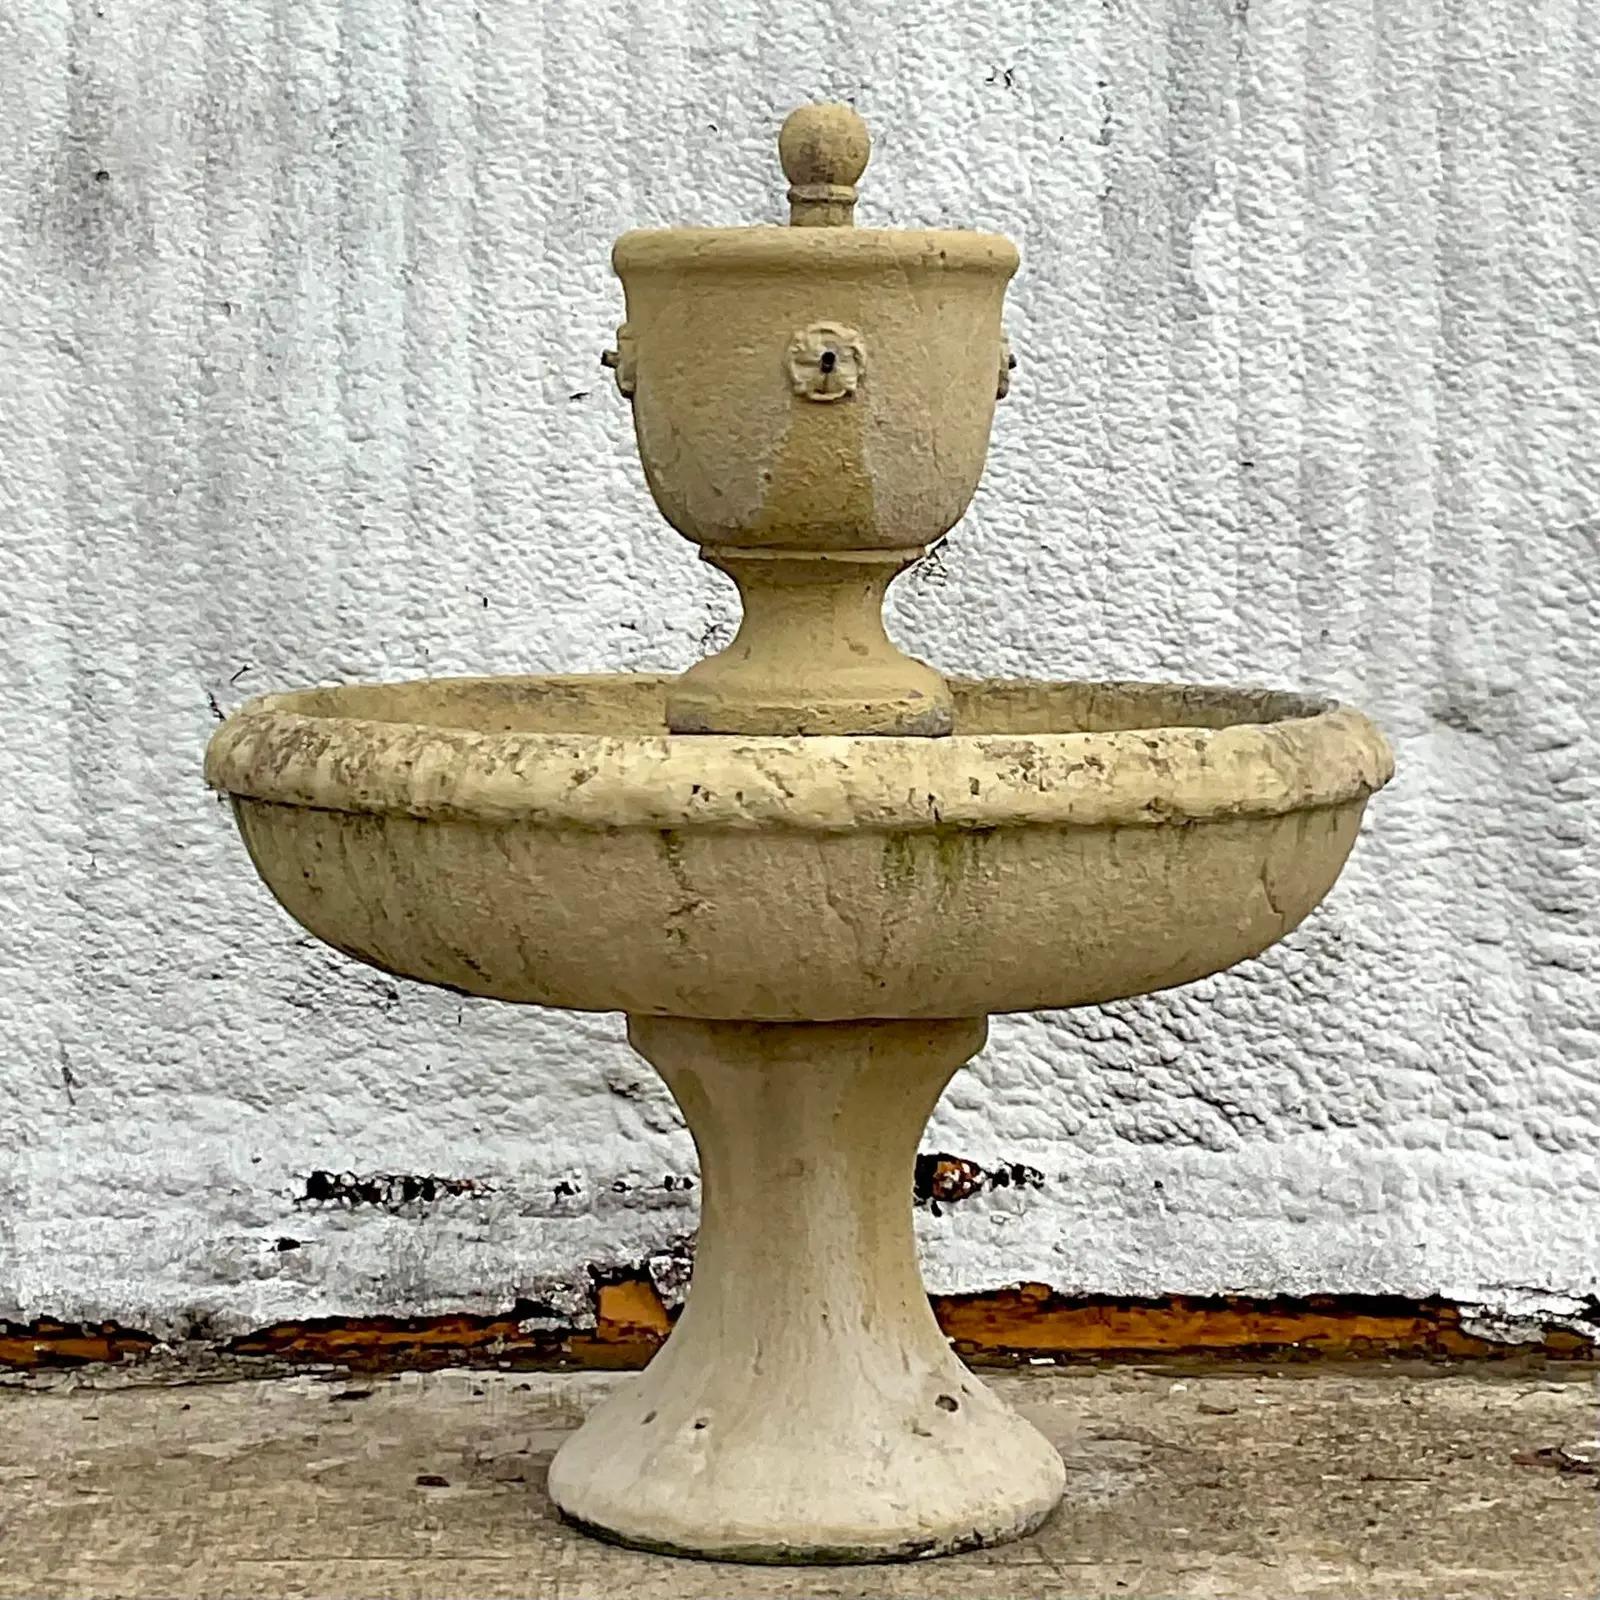 A fabulous vintage Coastal concrete water fountain. Beautiful multi layered piece just waiting for you to bring it back to its former glory. Perfect as is or update to your needs. Equally gorgeous filled with conch shells. You decide! Acquired from